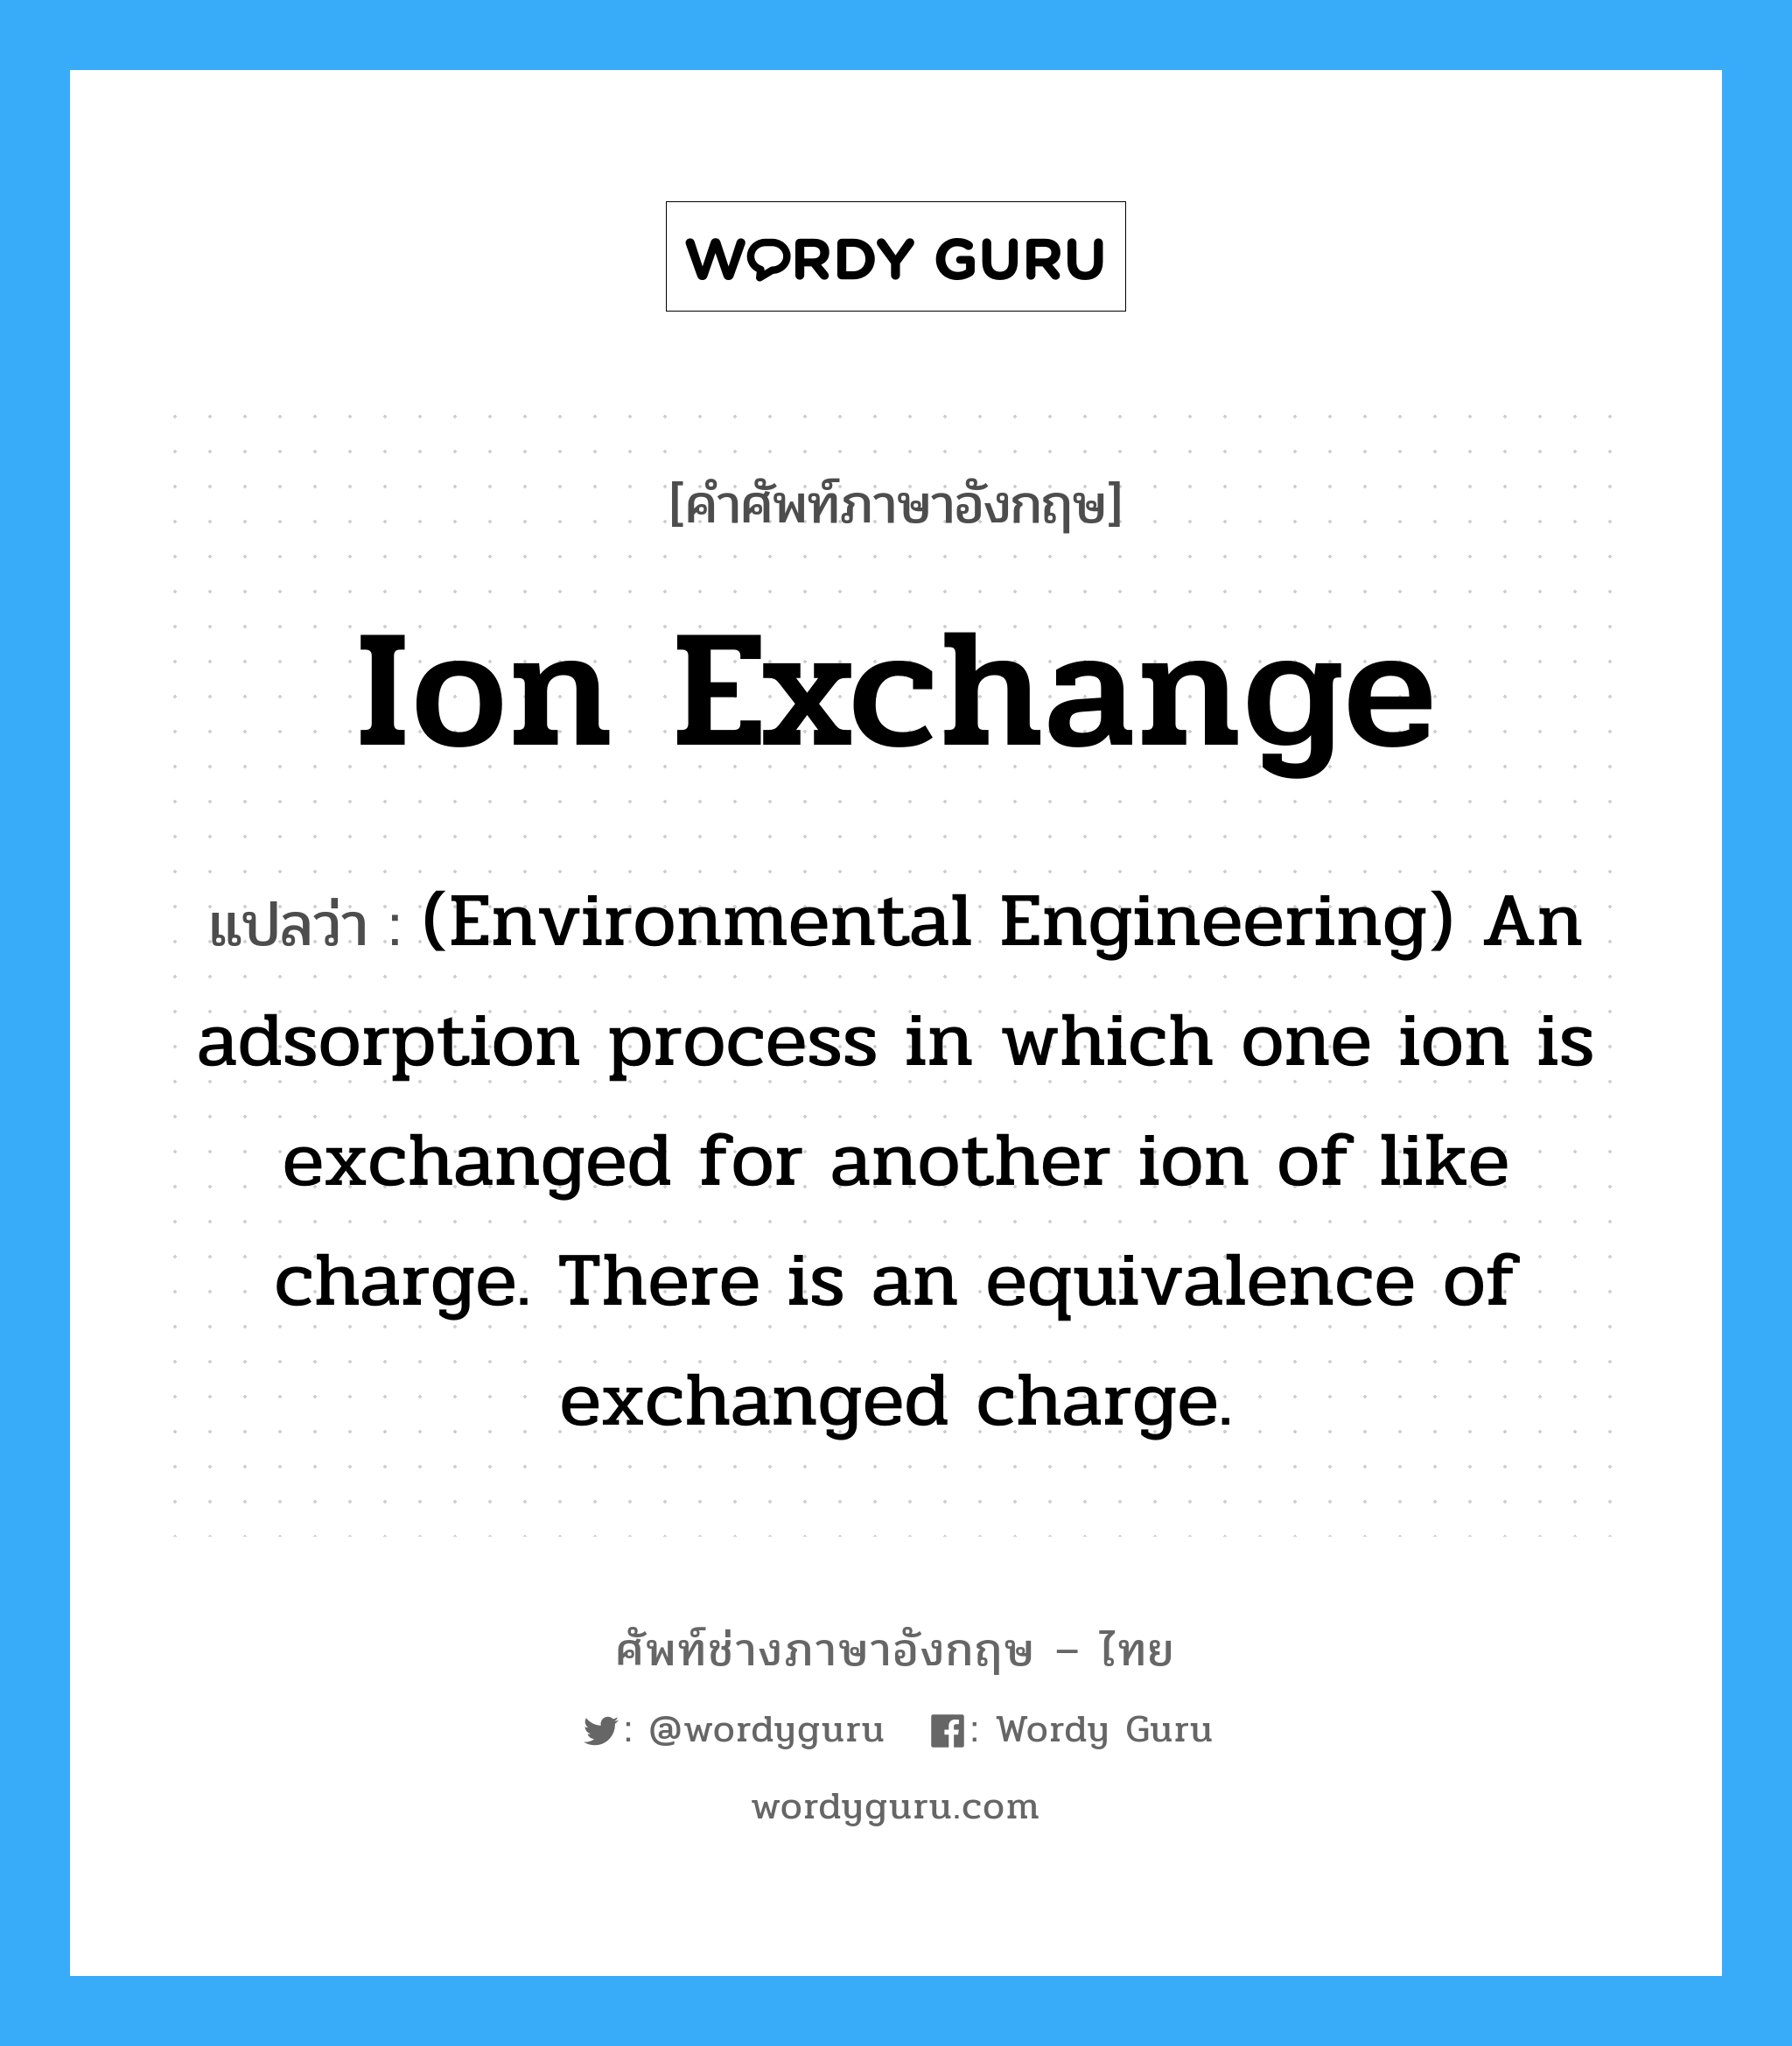 Ion exchange แปลว่า?, คำศัพท์ช่างภาษาอังกฤษ - ไทย Ion exchange คำศัพท์ภาษาอังกฤษ Ion exchange แปลว่า (Environmental Engineering) An adsorption process in which one ion is exchanged for another ion of like charge. There is an equivalence of exchanged charge.